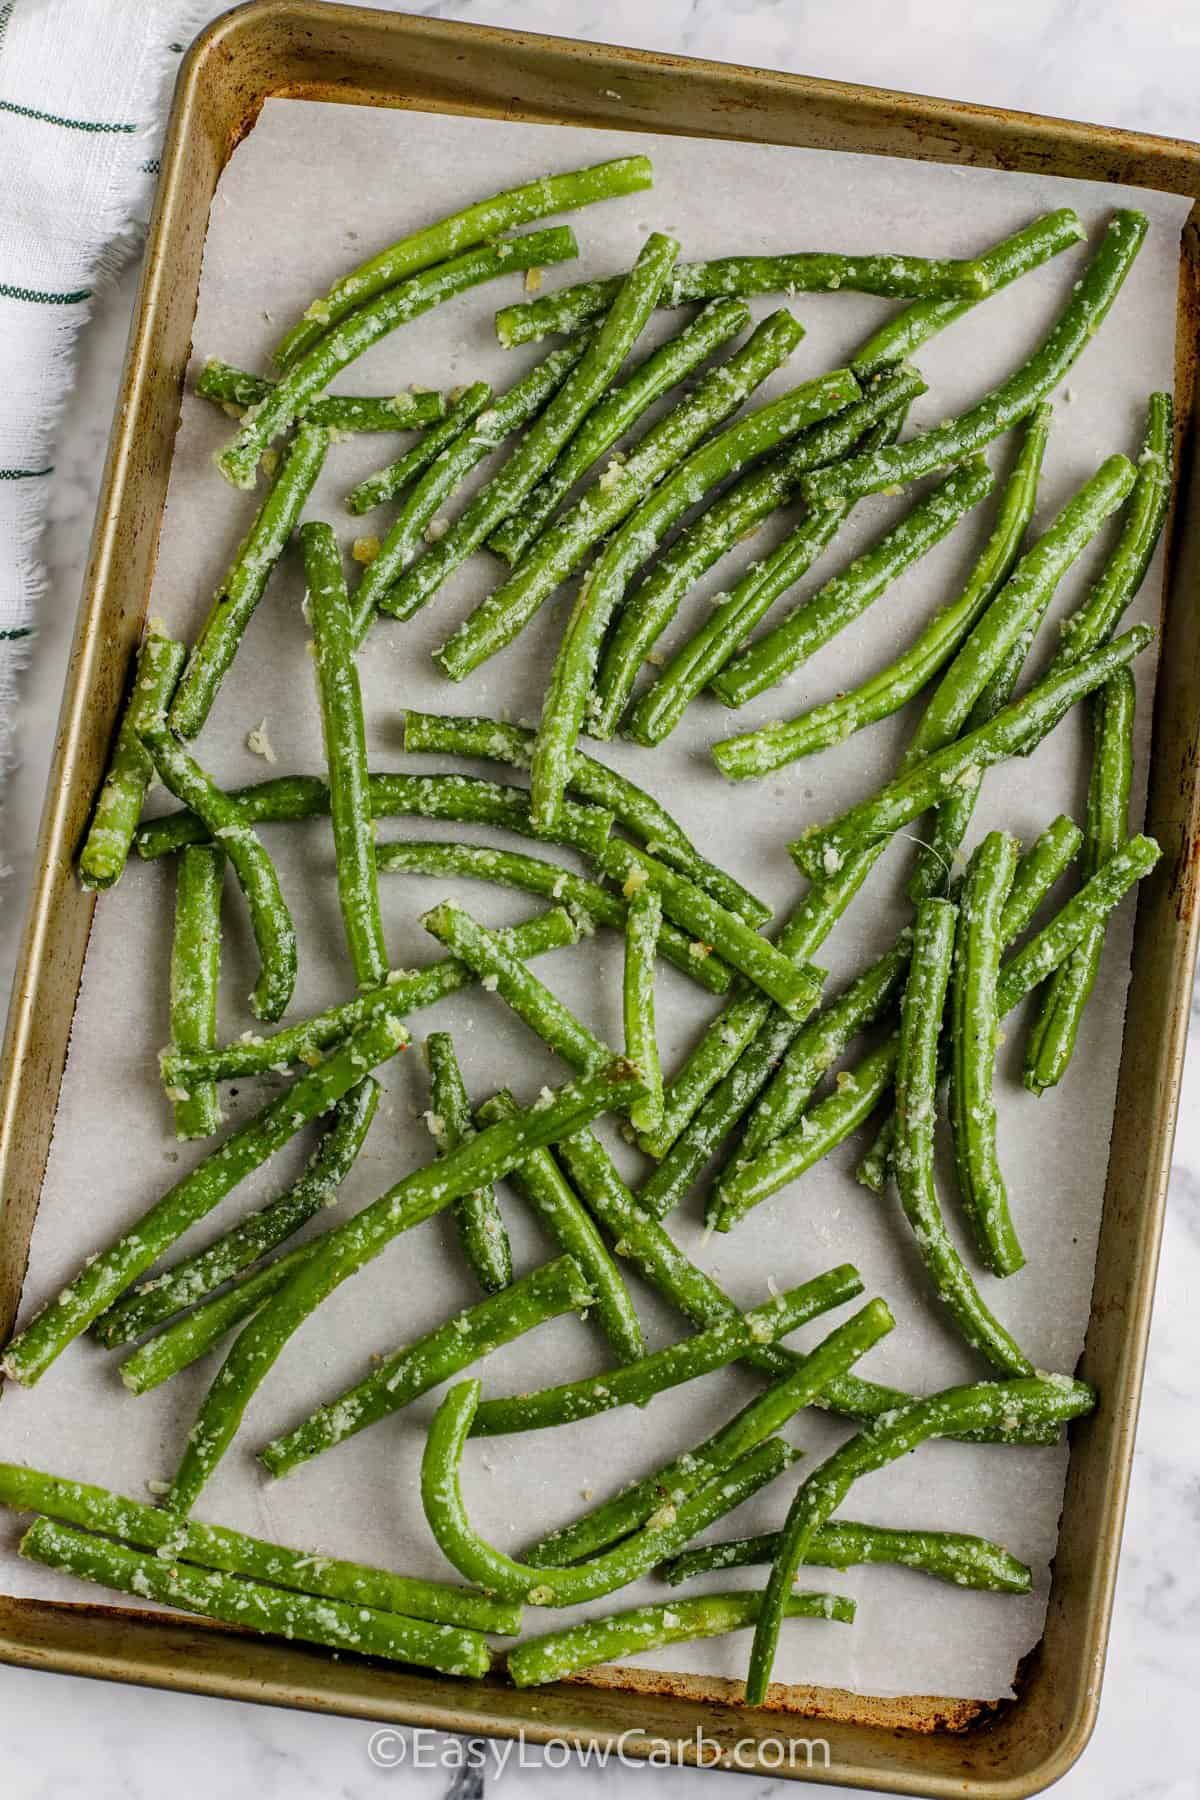 Roasted Green Beans on a baking sheet before cooking